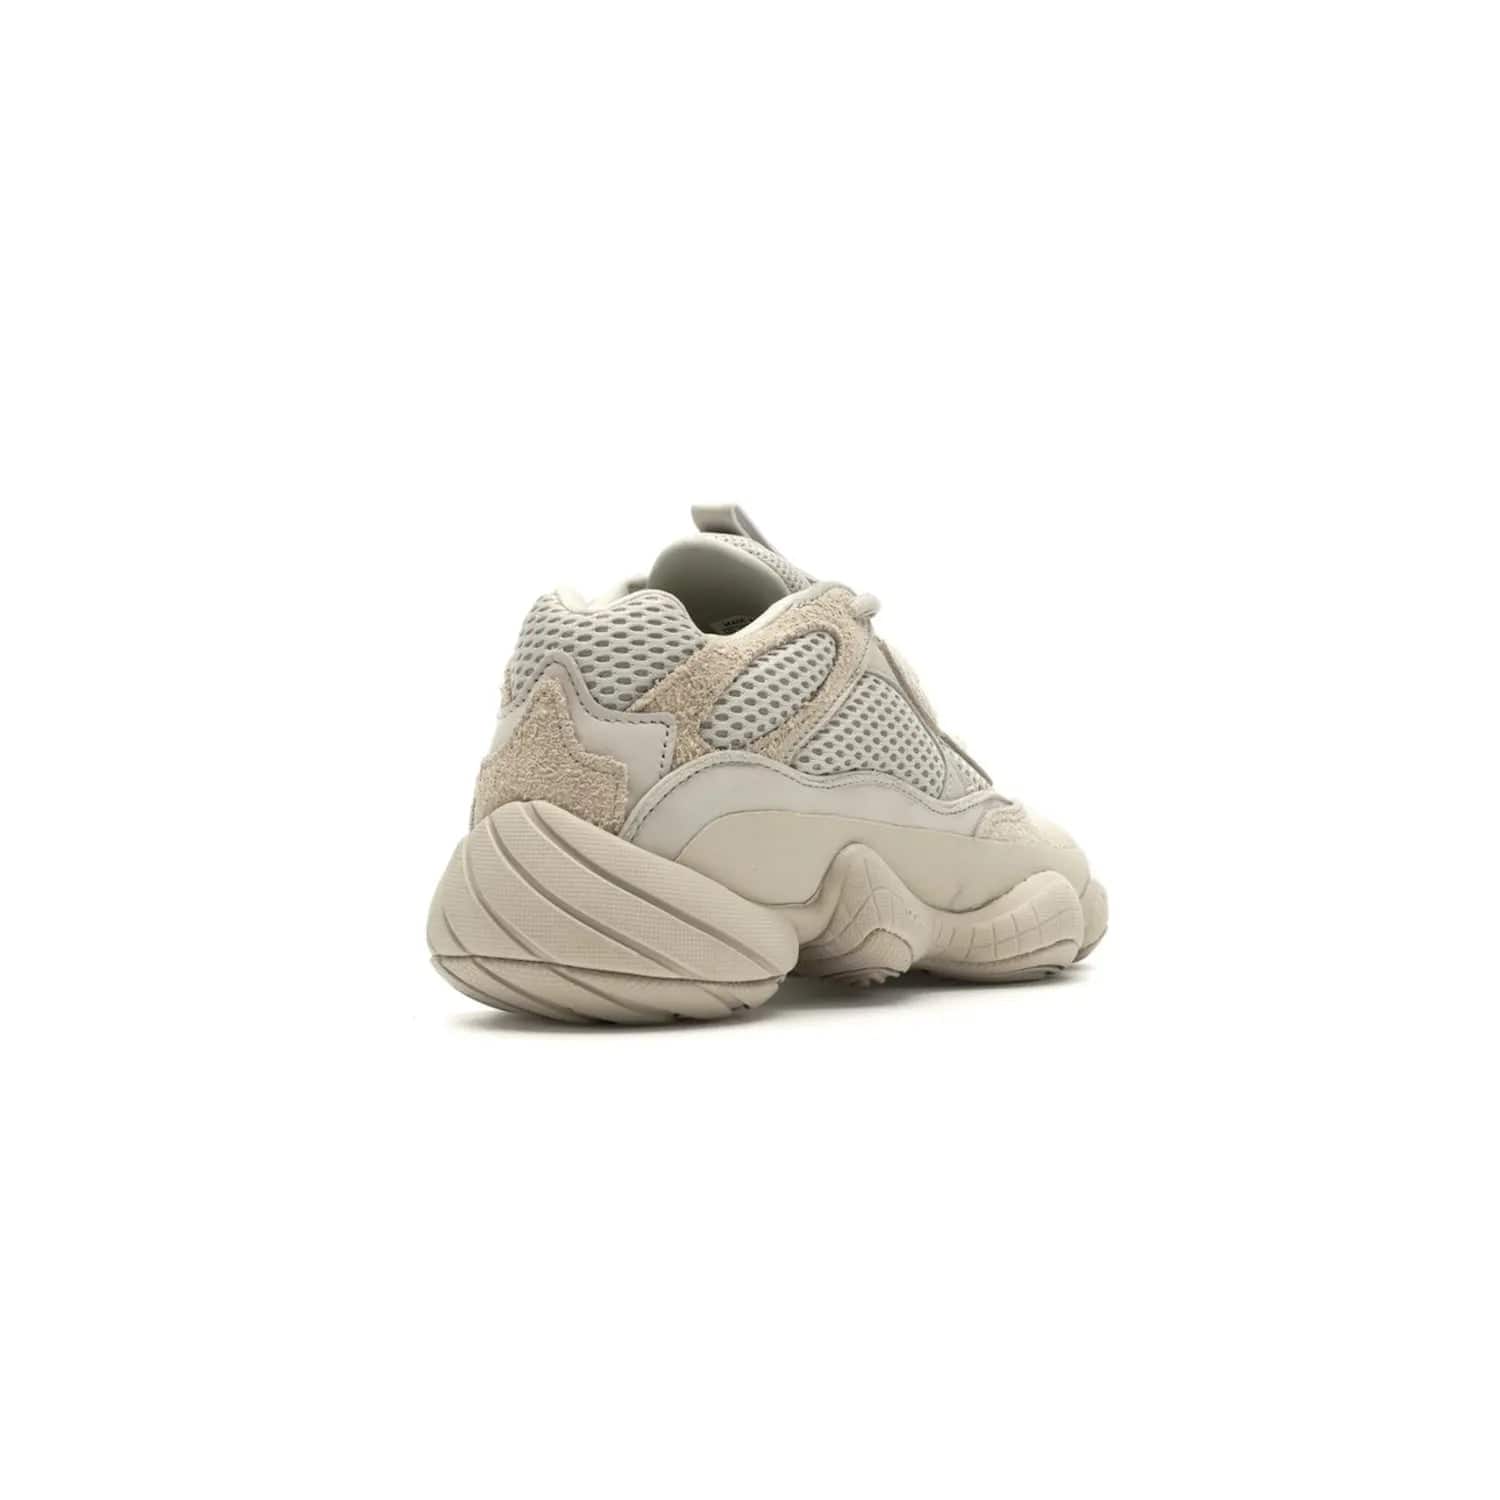 adidas Yeezy 500 Blush - Image 31 - Only at www.BallersClubKickz.com - Step up your sneaker game with the Adidas Yeezy 500 Blush. Monochromatic pale pink palette, hiking-inspired suede/mesh construction, plus adiPRENE sole for comfort and performance. Get the Adidas Yeezy 500 and experience true style and comfort.